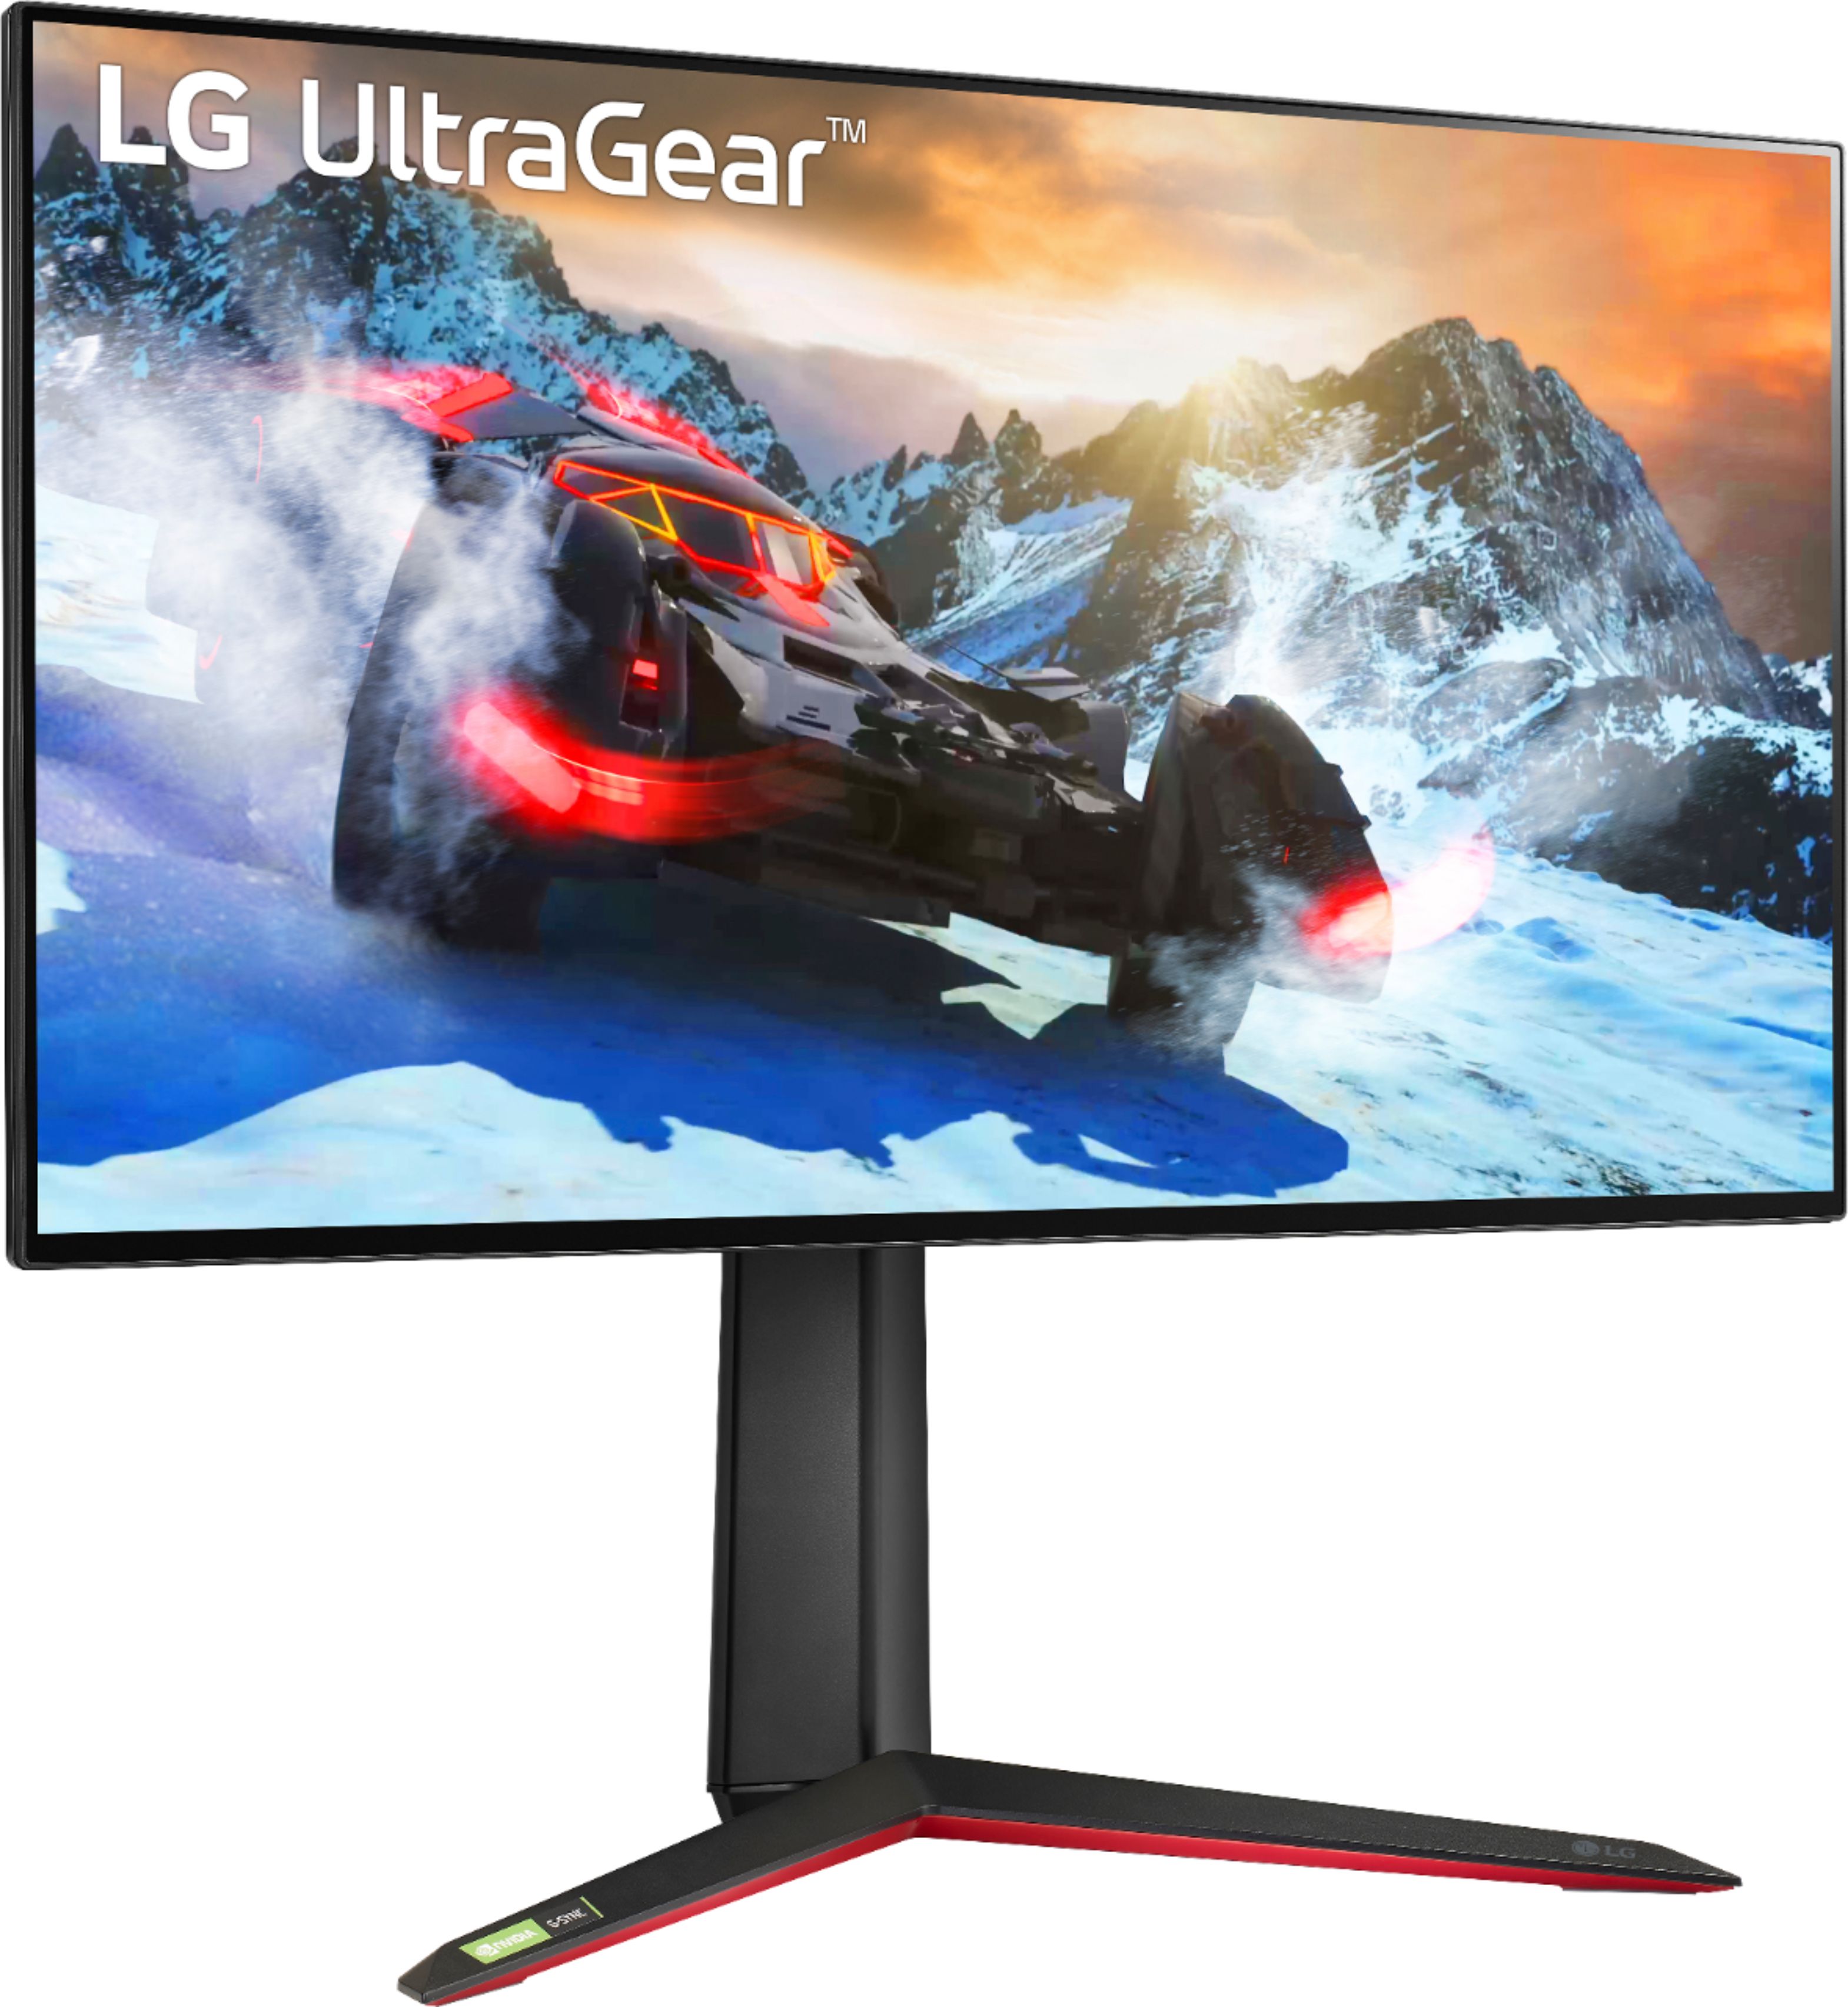 Angle View: LG - UltraGear 27" IPS UHD 1-ms FreeSync and G-SYNC Compatible Monitor - Black